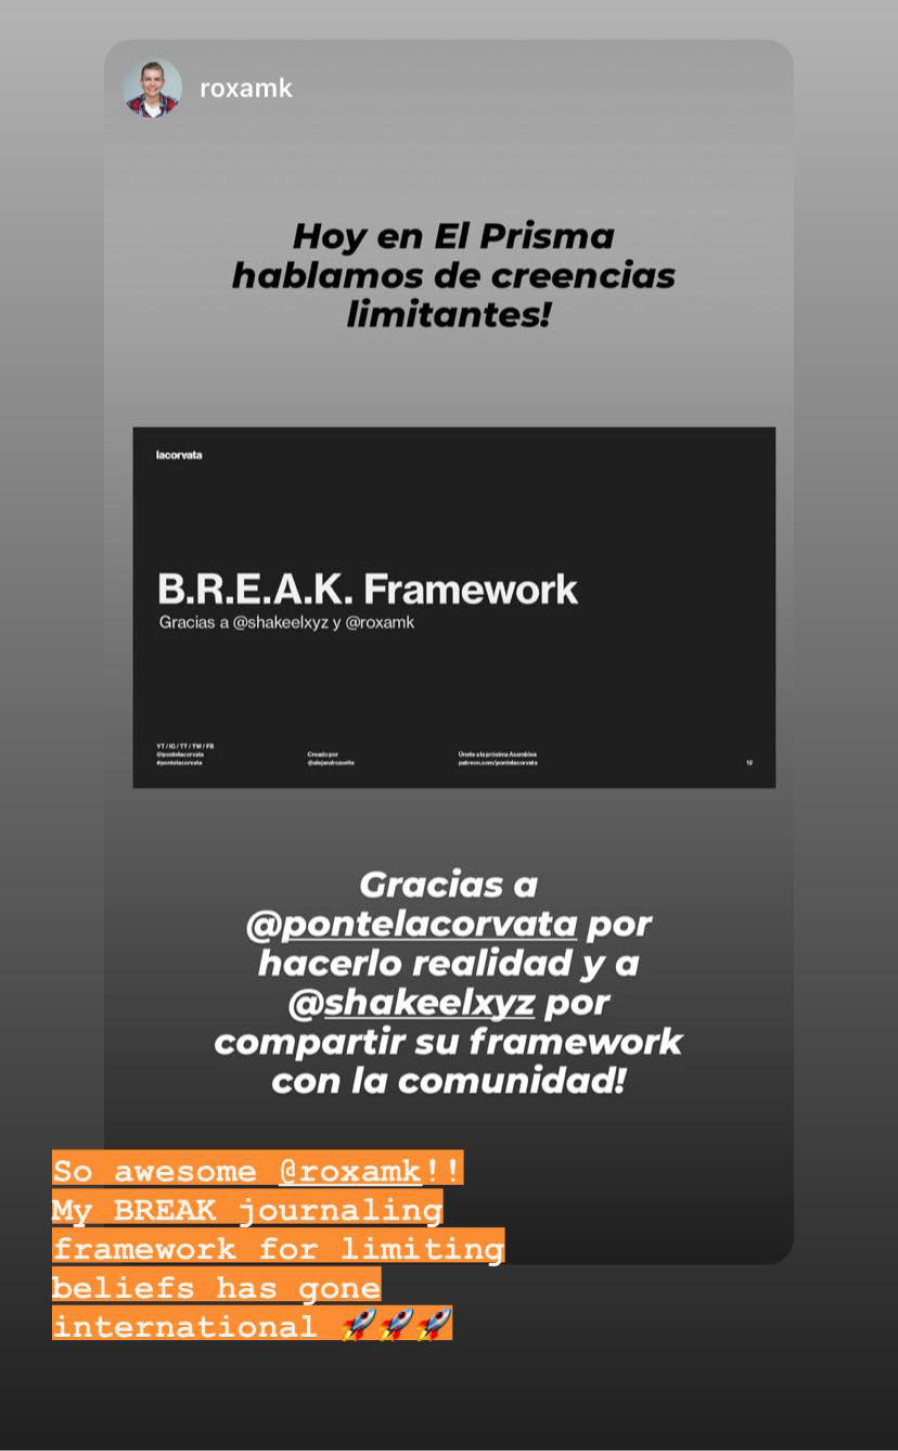 A screenshot of an Instagram story from @roxamk showing the BREAK framework translated into Spanish